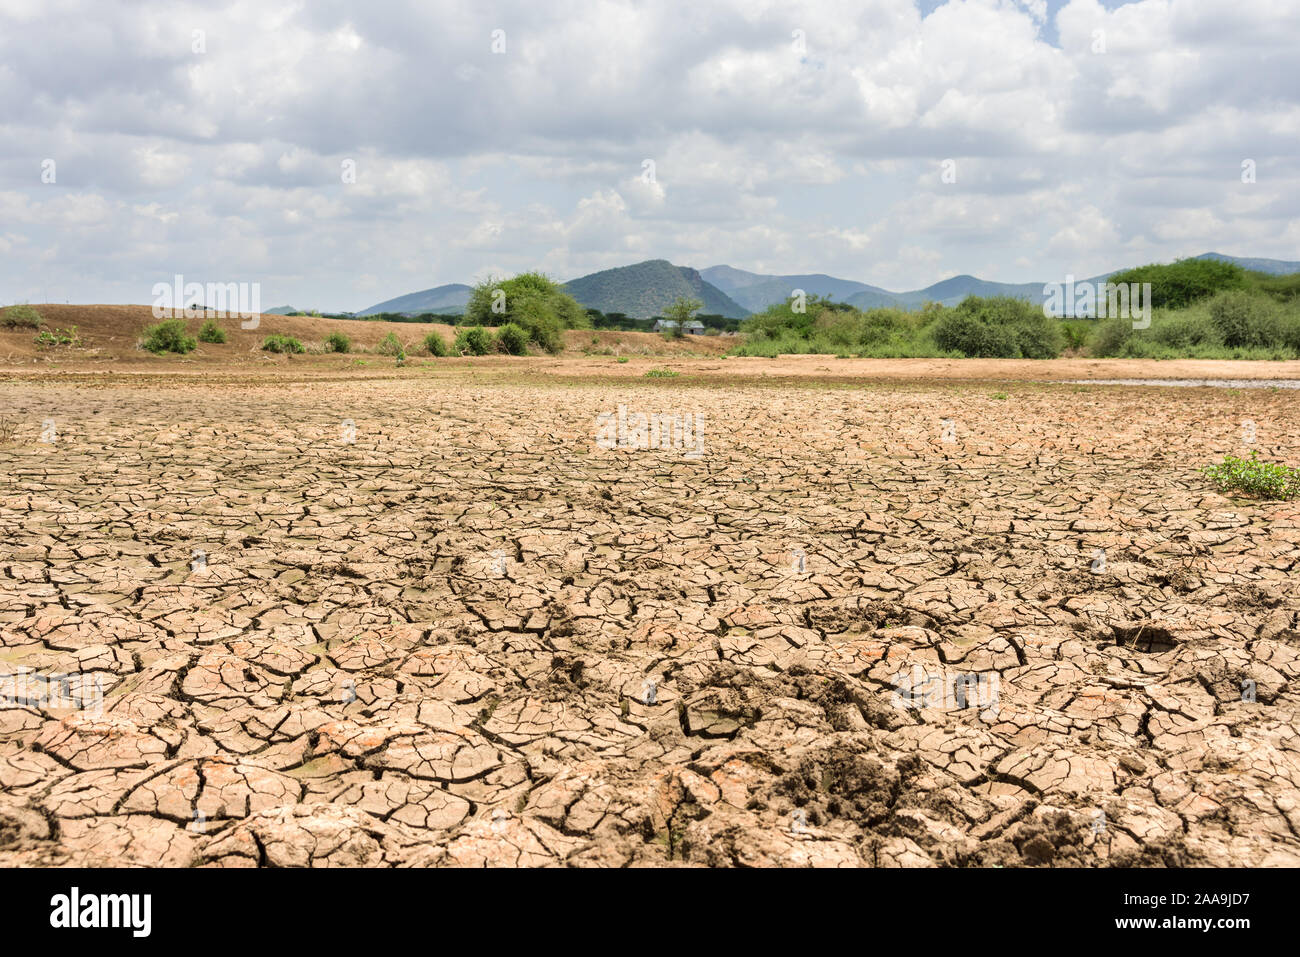 A dried up lake bed due to lack of rain with trees and hills in background, Kajiado County, Kenya Stock Photo